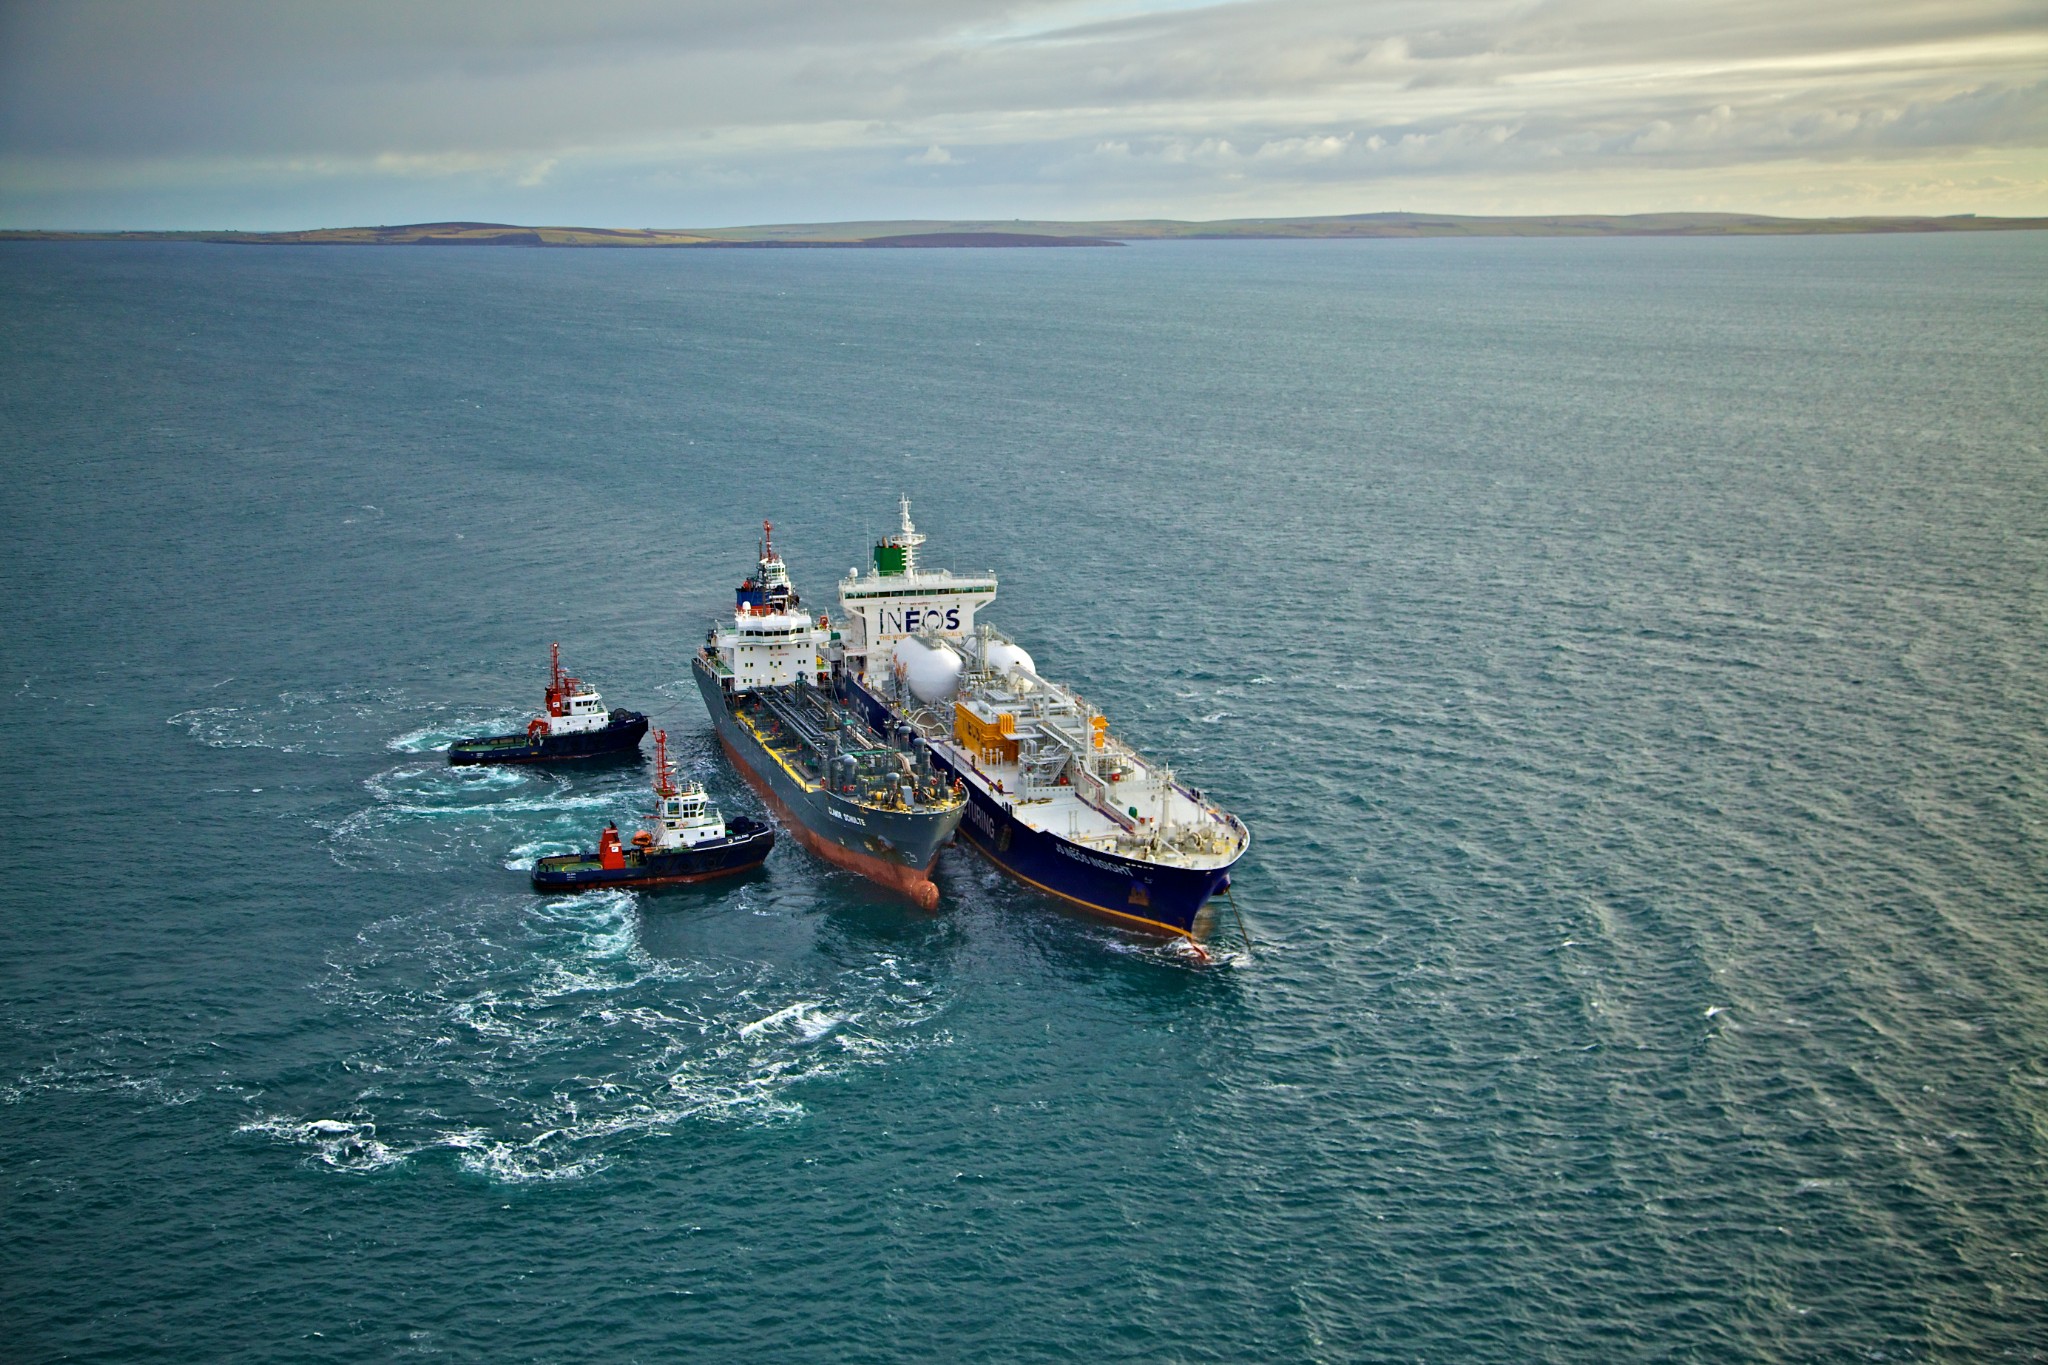 Ship to ship operation in Scapa Flow, Orkney - image by Colin Keldie